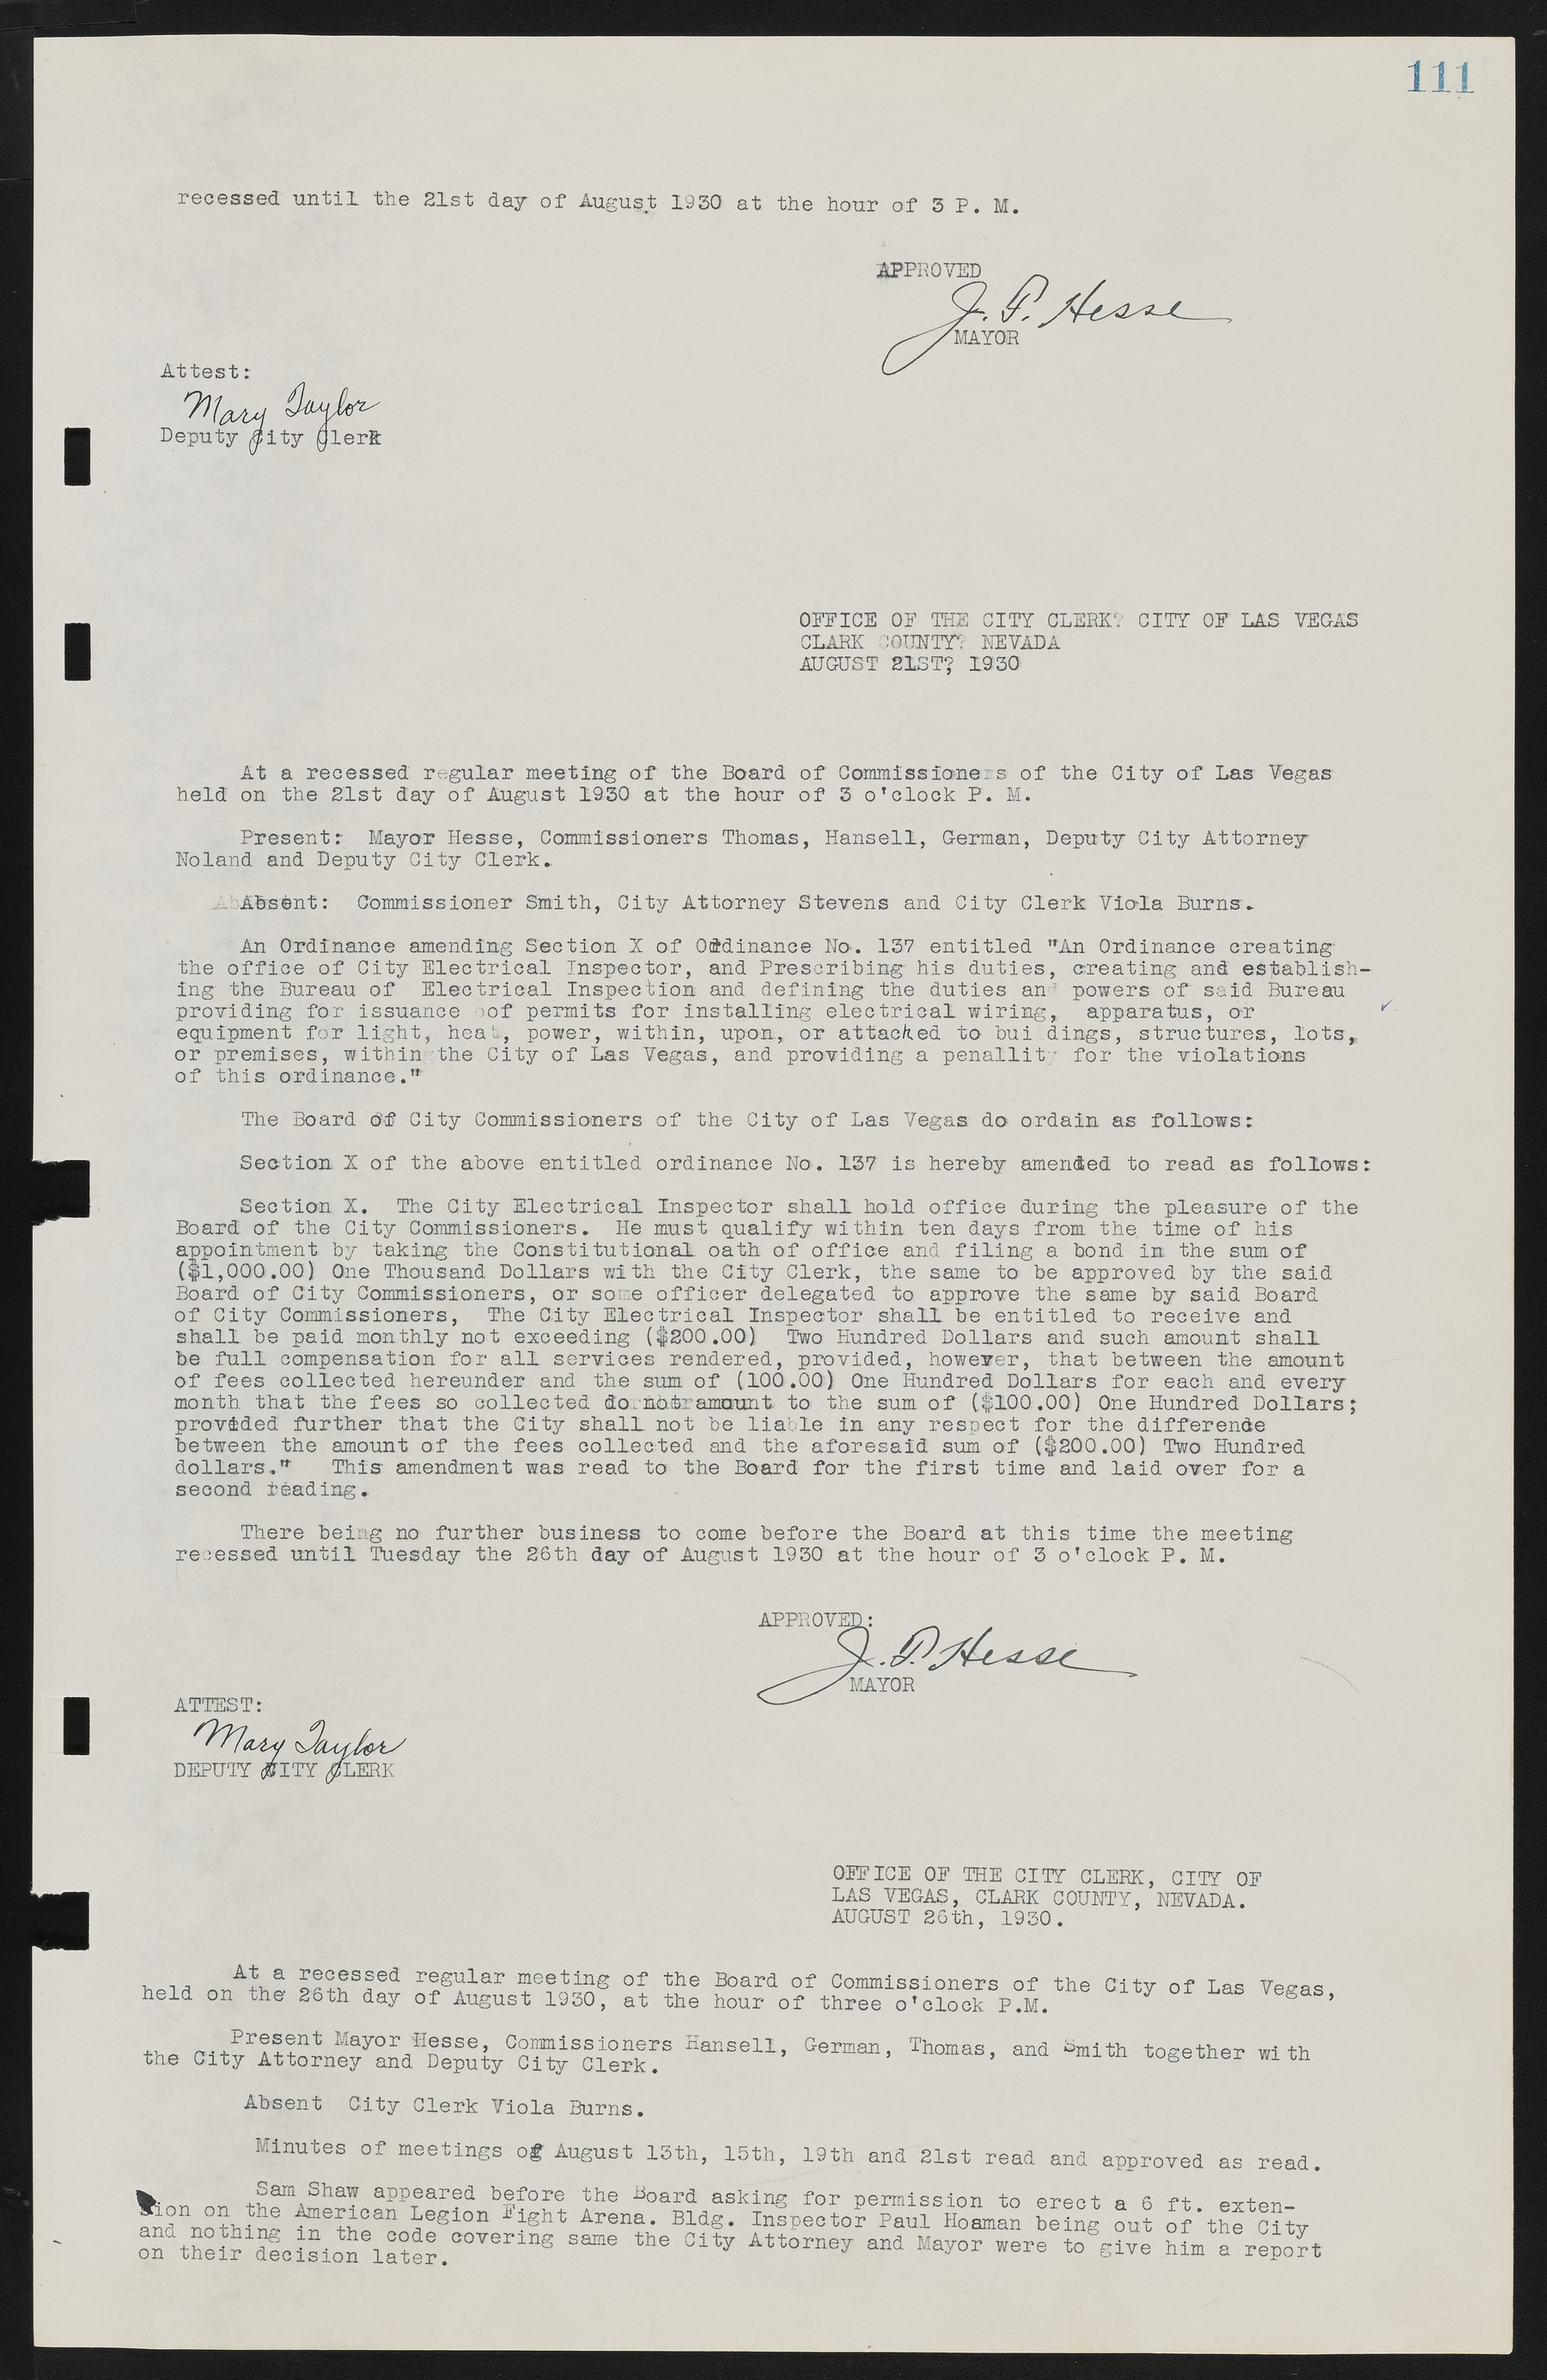 Las Vegas City Commission Minutes, May 14, 1929 to February 11, 1937, lvc000003-117